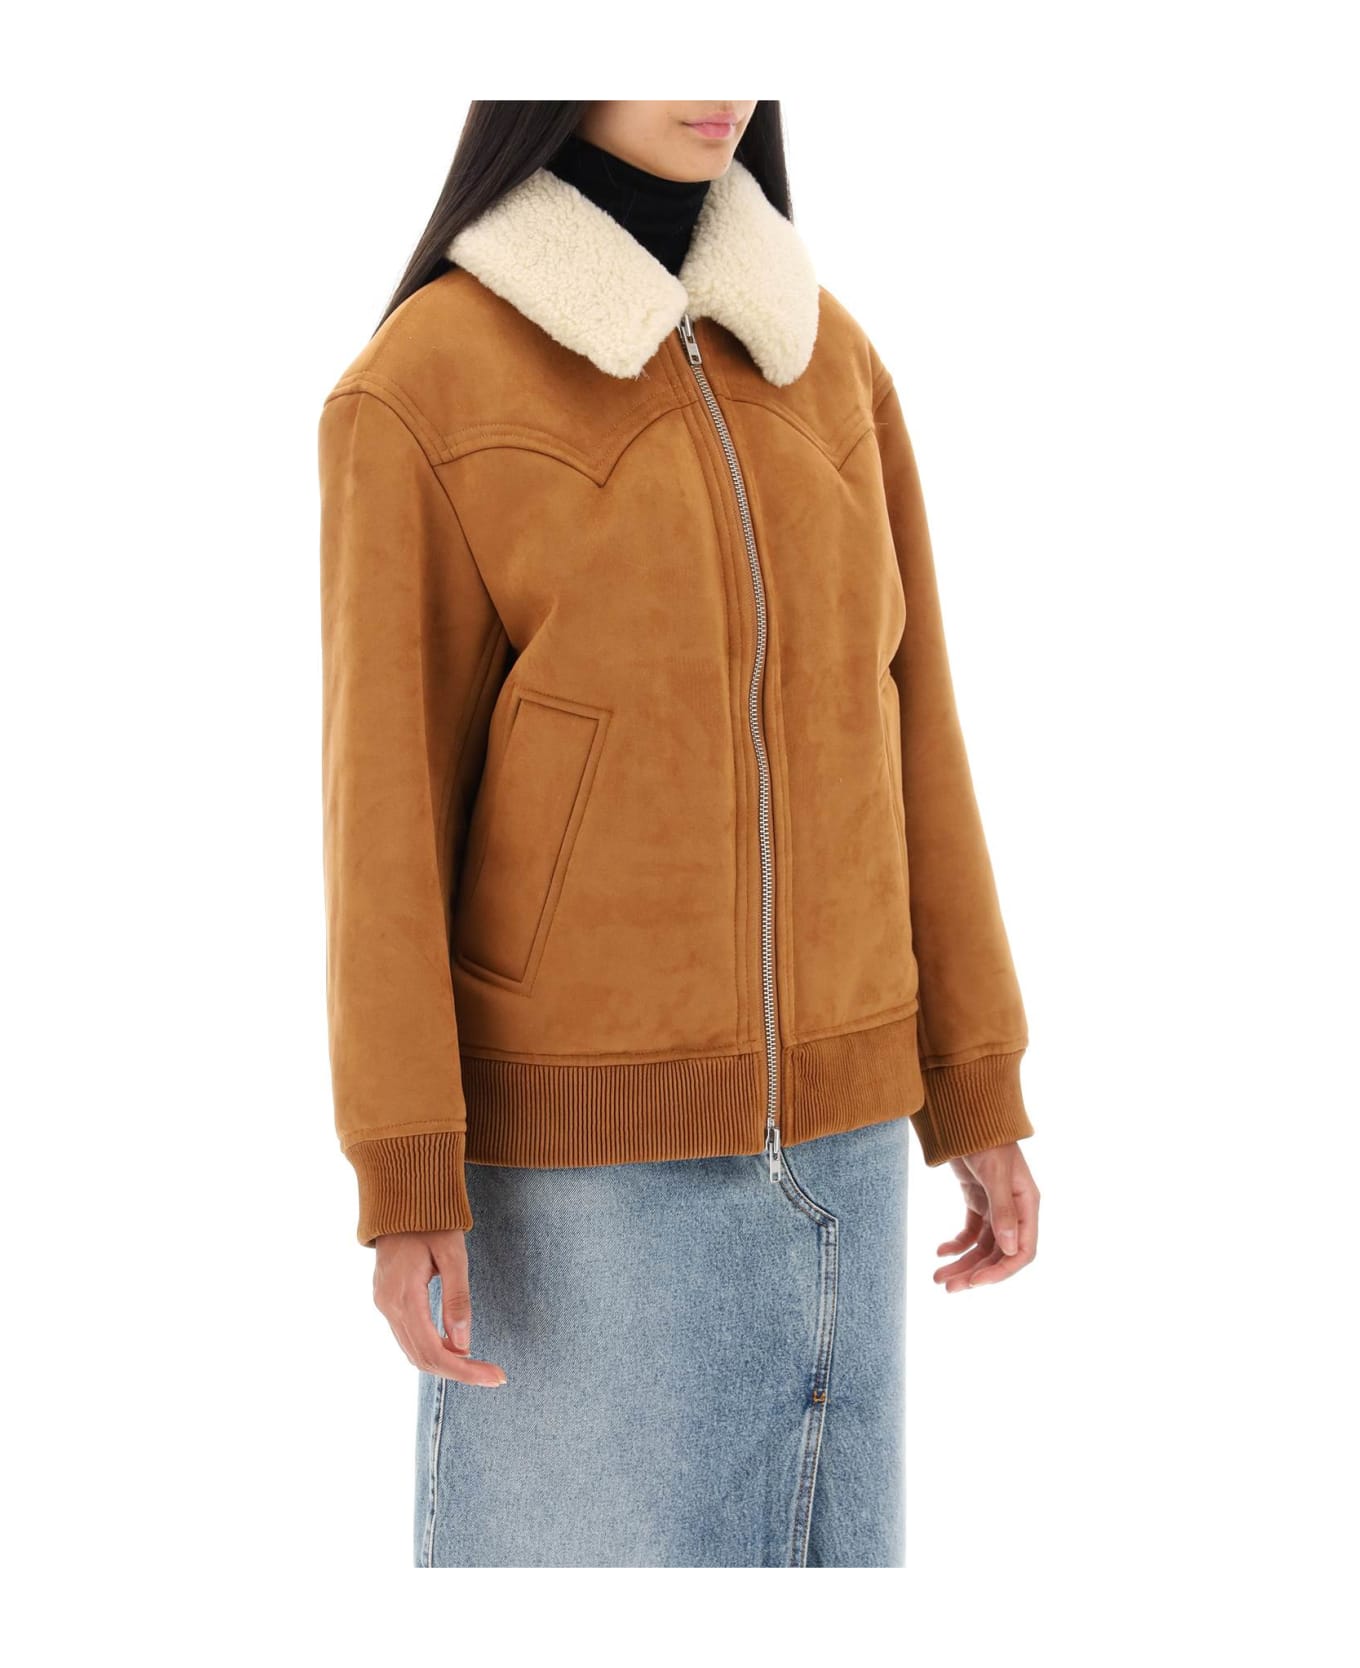 STAND STUDIO Lillee Eco-shearling Bomber Jacket - TAN NATURAL WHITE (Brown)